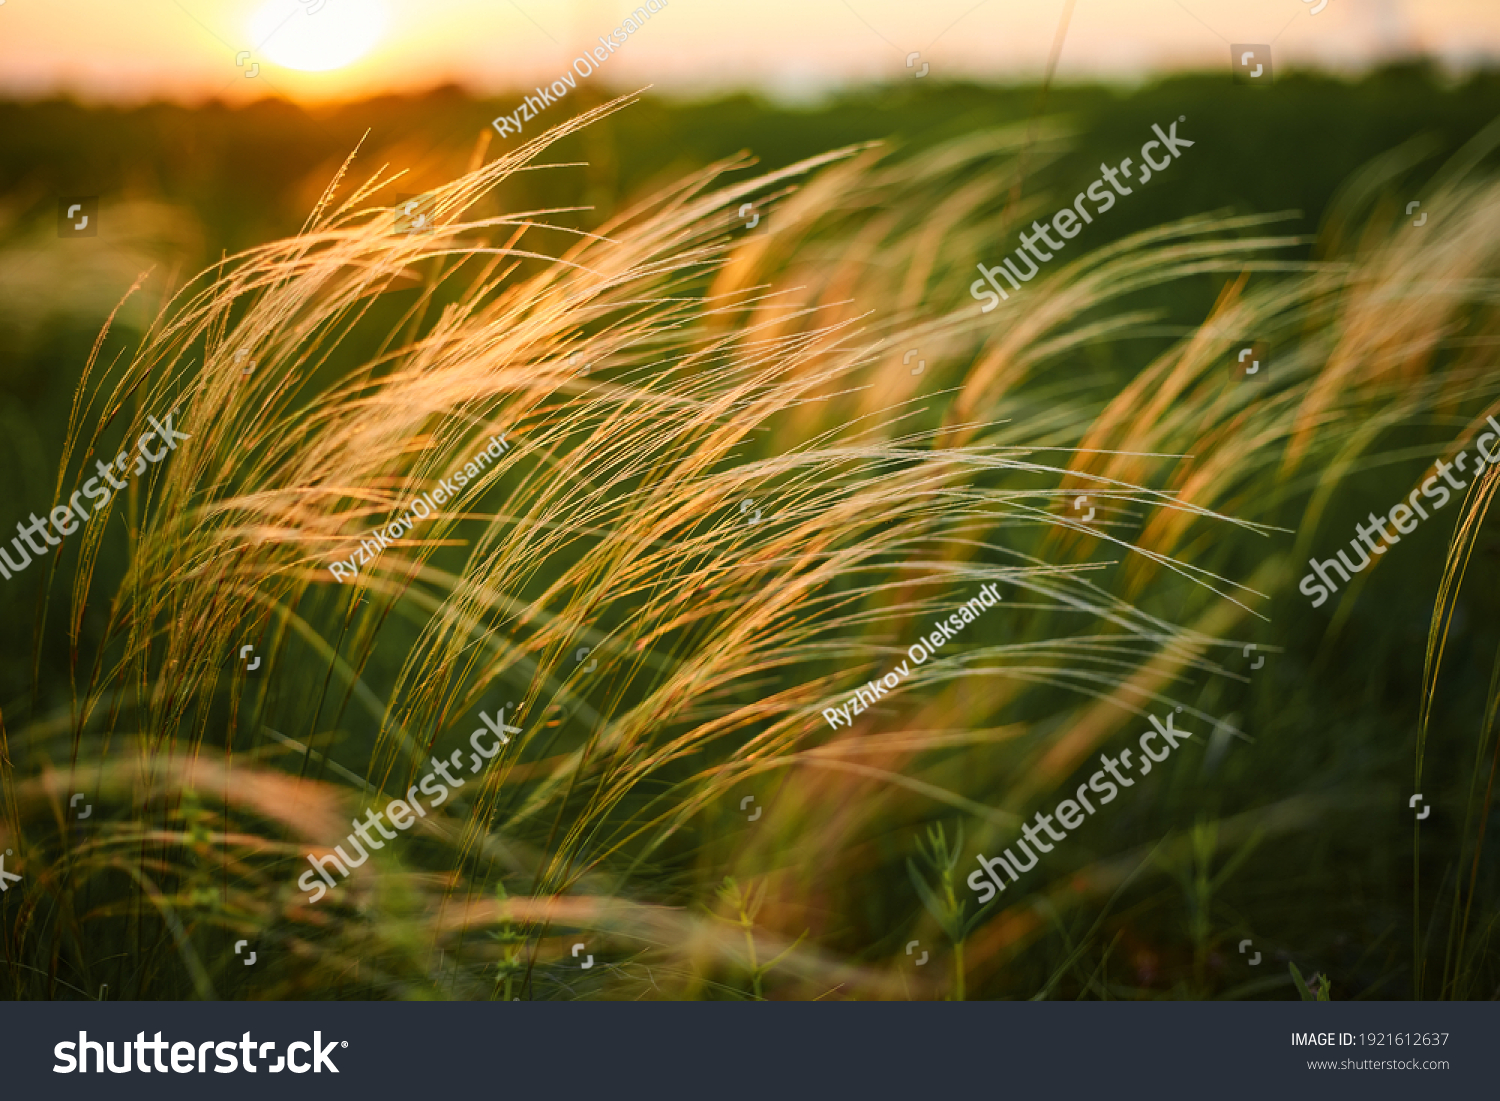 Feather Grass or Needle Grass, Nassella tenuissima, forms already at the slightest breath of wind filigree pattern. #1921612637